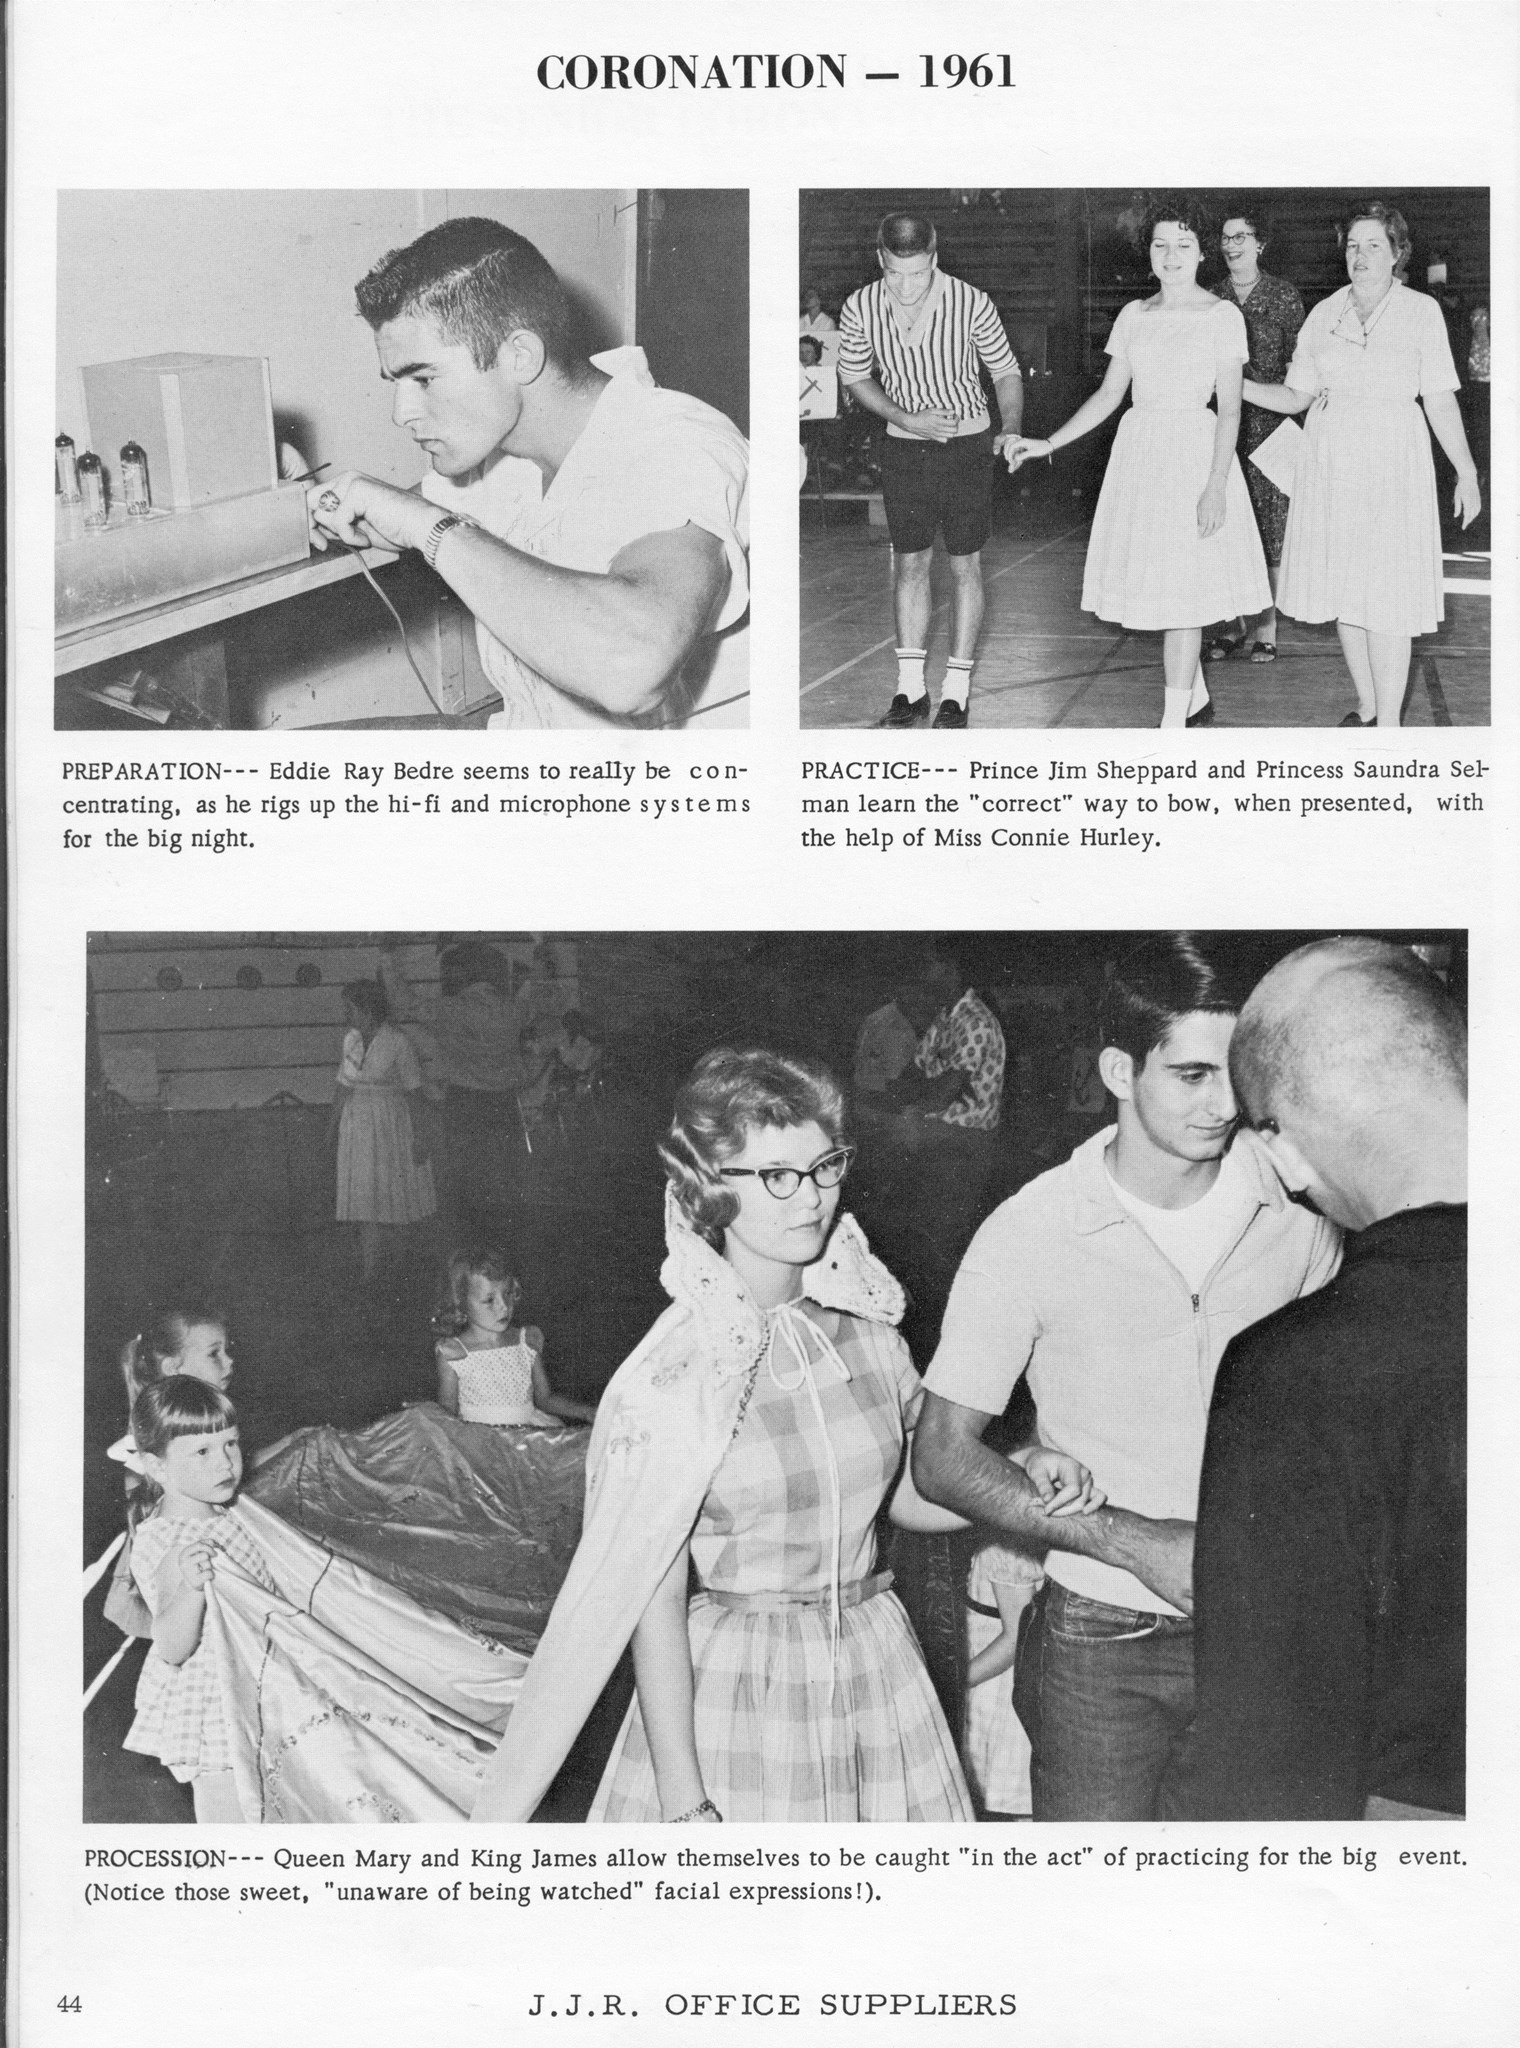 ../../../Images/Large/1961/Arclight-1961-pg0044.jpg